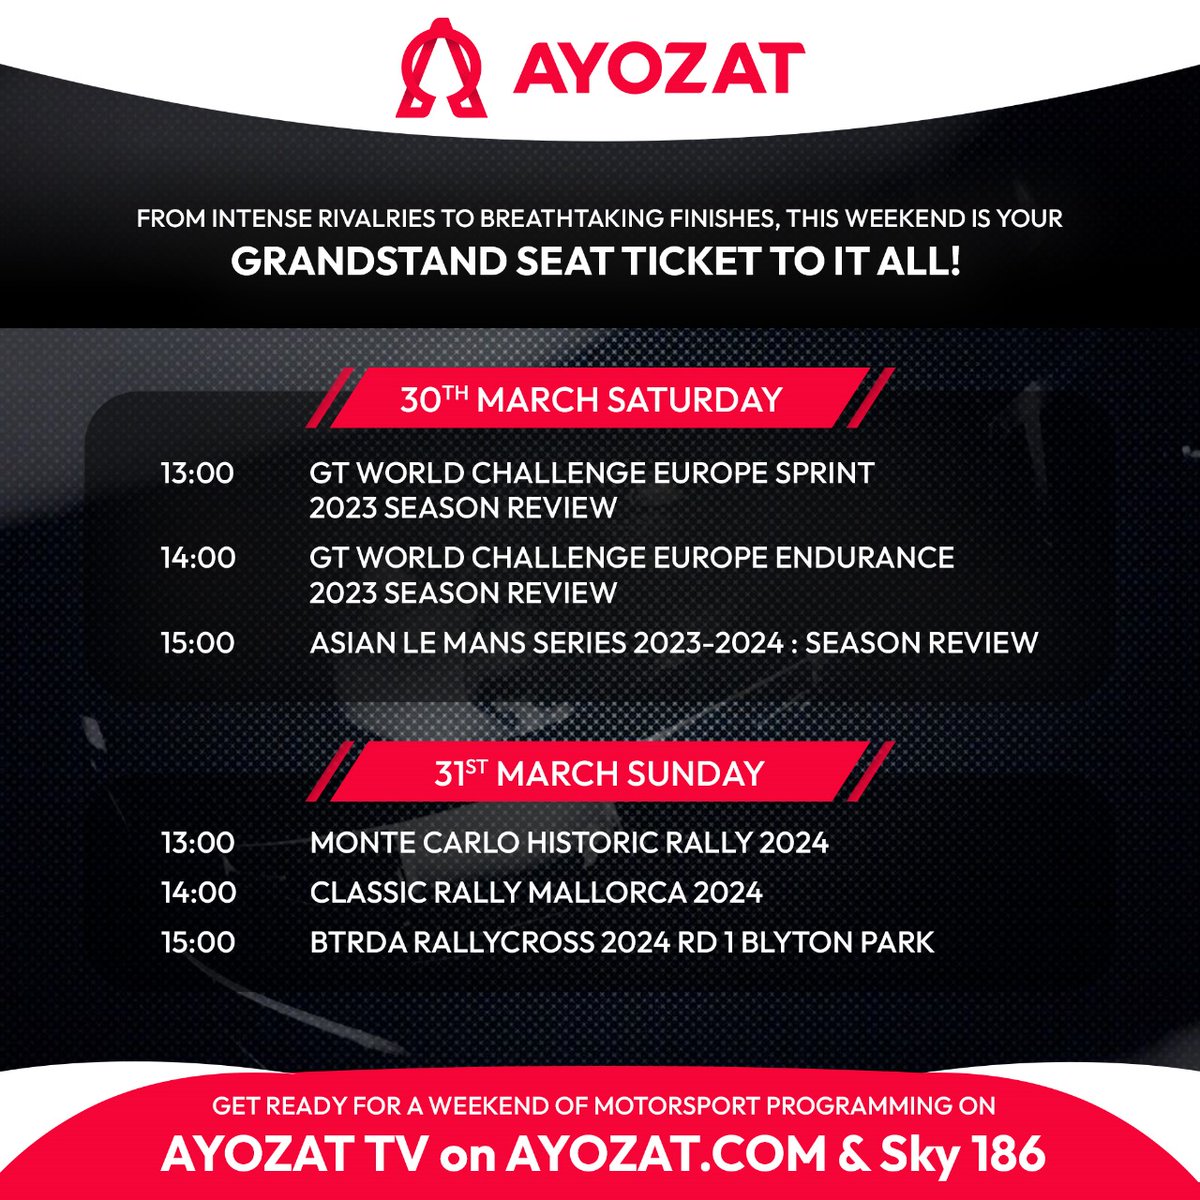 Rev your engines! Don't miss the adrenaline-packed motorsport lineup this weekend starting from 1pm on AYOZAT TV at Sky 186 and ayozat.com. Get ready for intense races, roaring engines, and thrilling action!
#motorsport #cars #racing #action #weekendracing